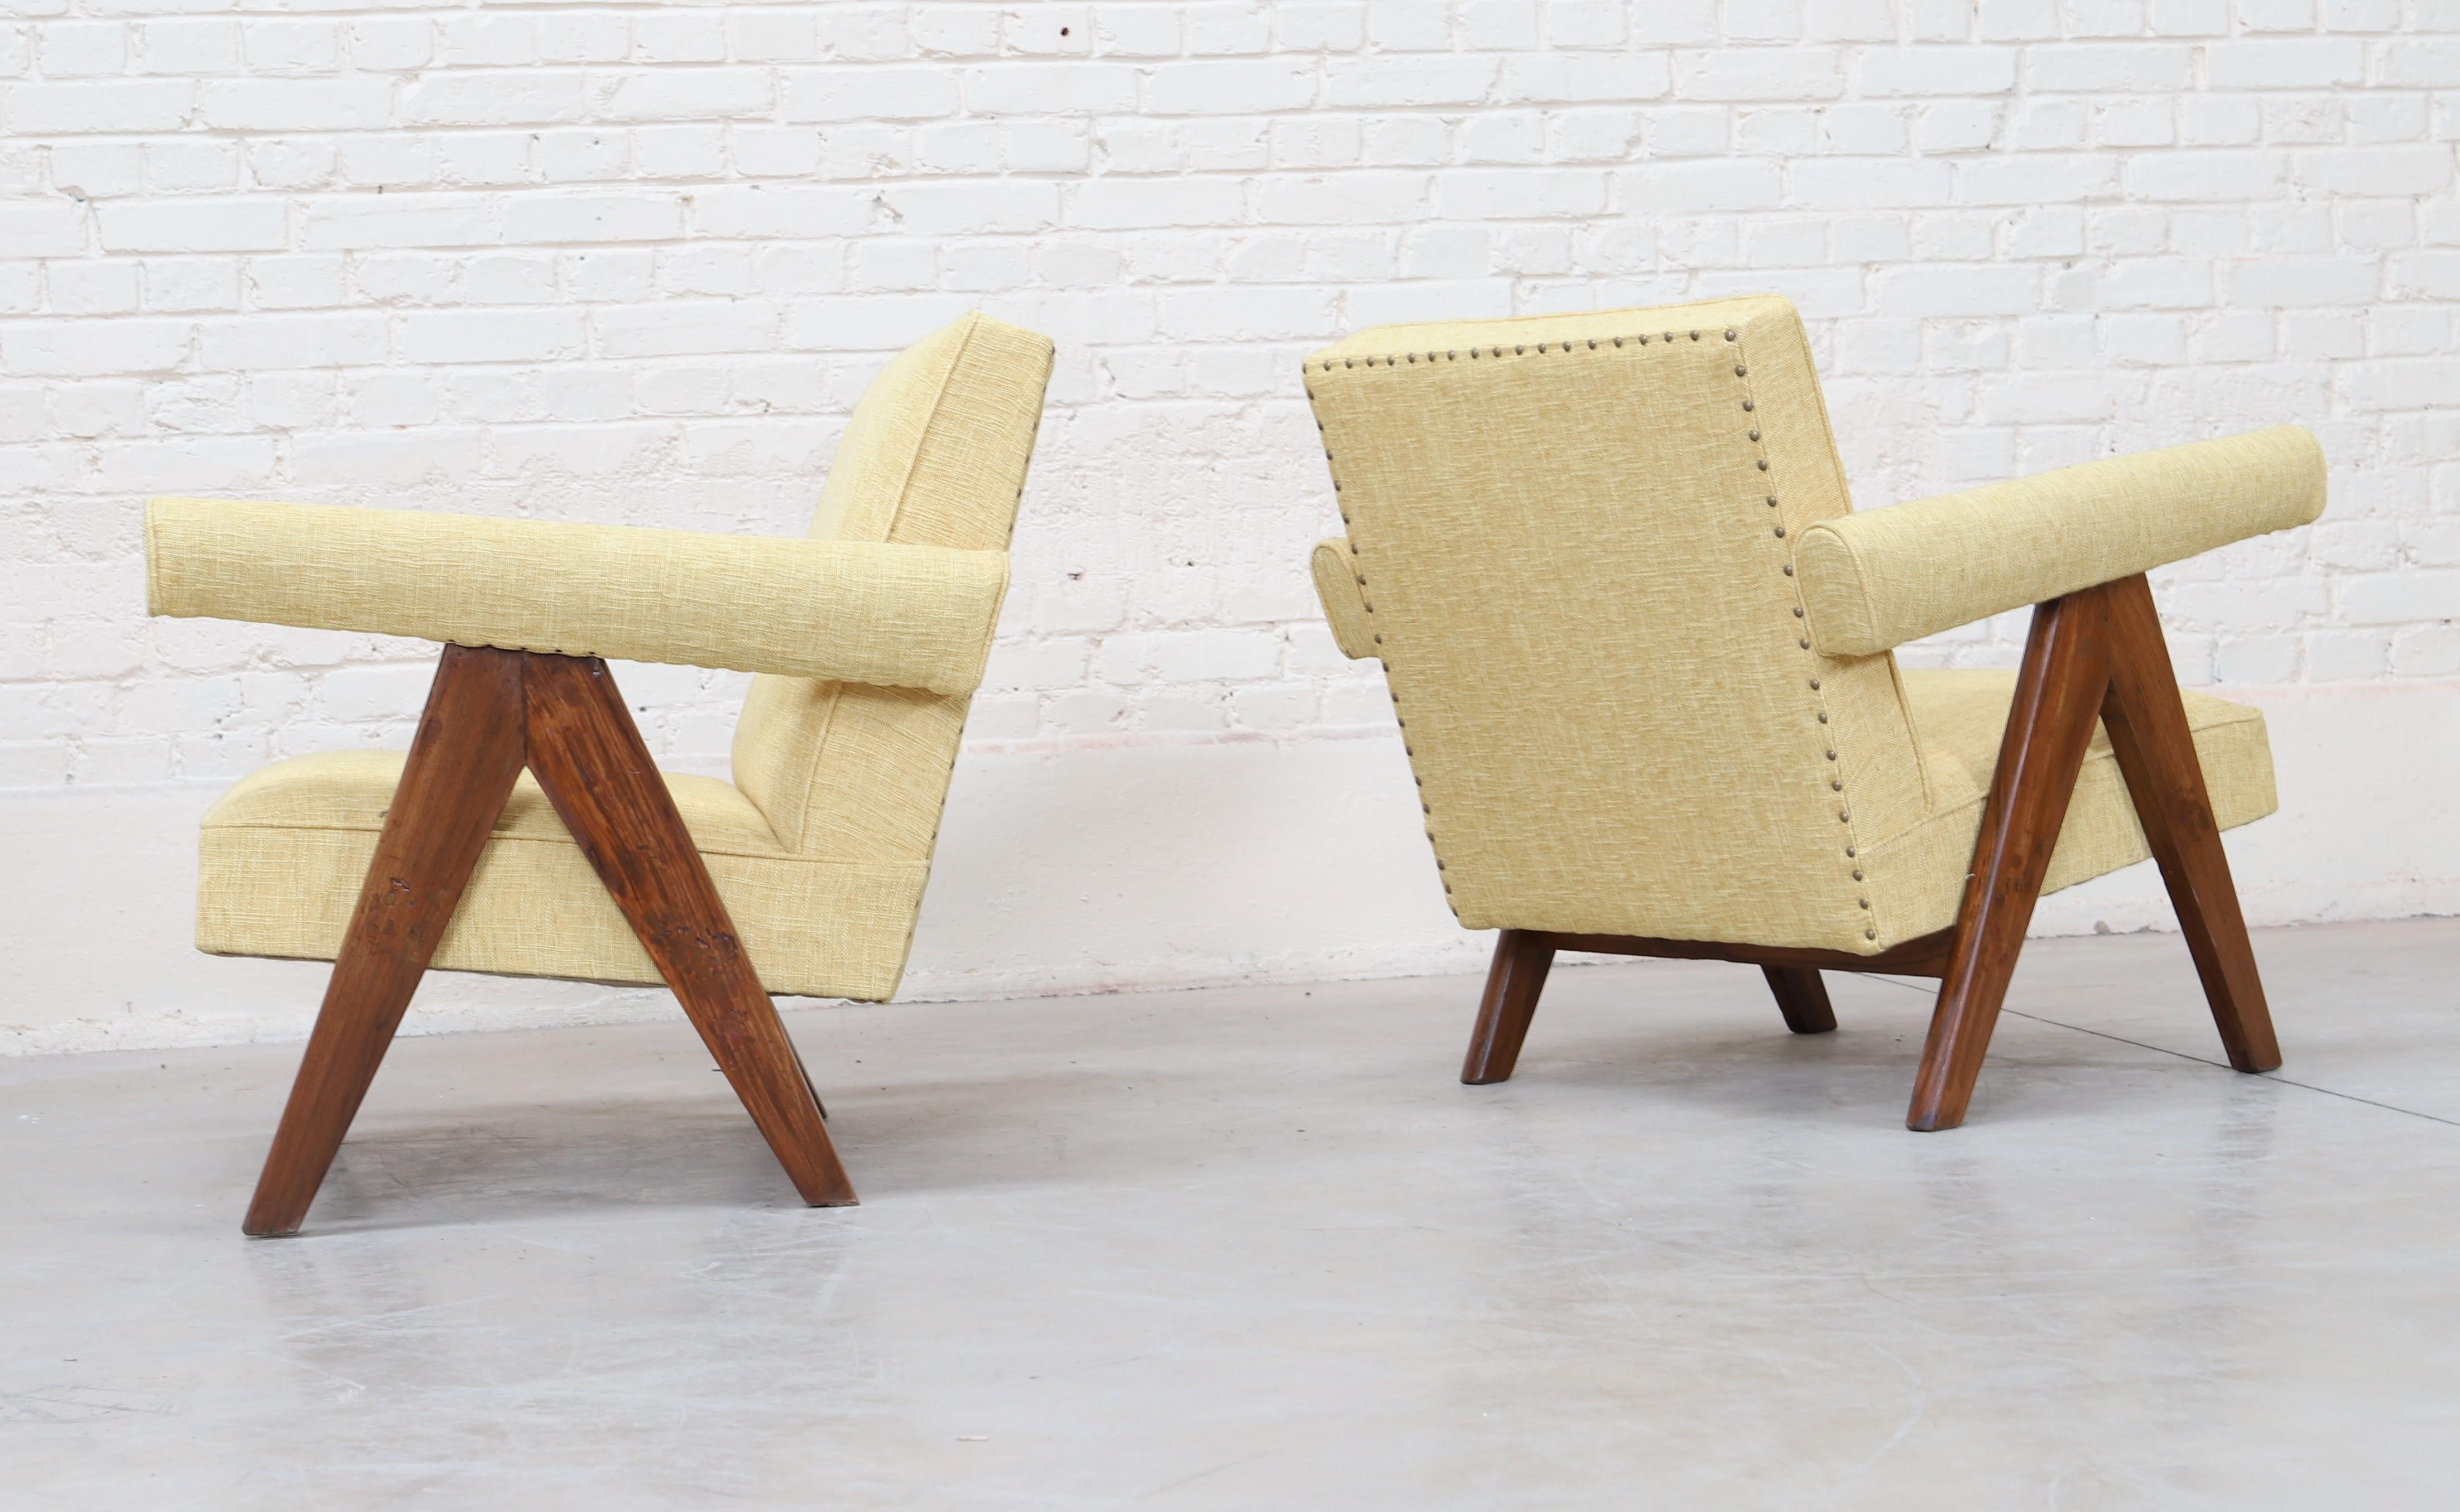 Armchair in solid teak and cotton. Backrest, seatback and armrests slightly upside down, covered with a yellow fabric. Teak type legs with flat profiled legs, connected by two support rails under the seat. Detached armrests with padded sleeves of